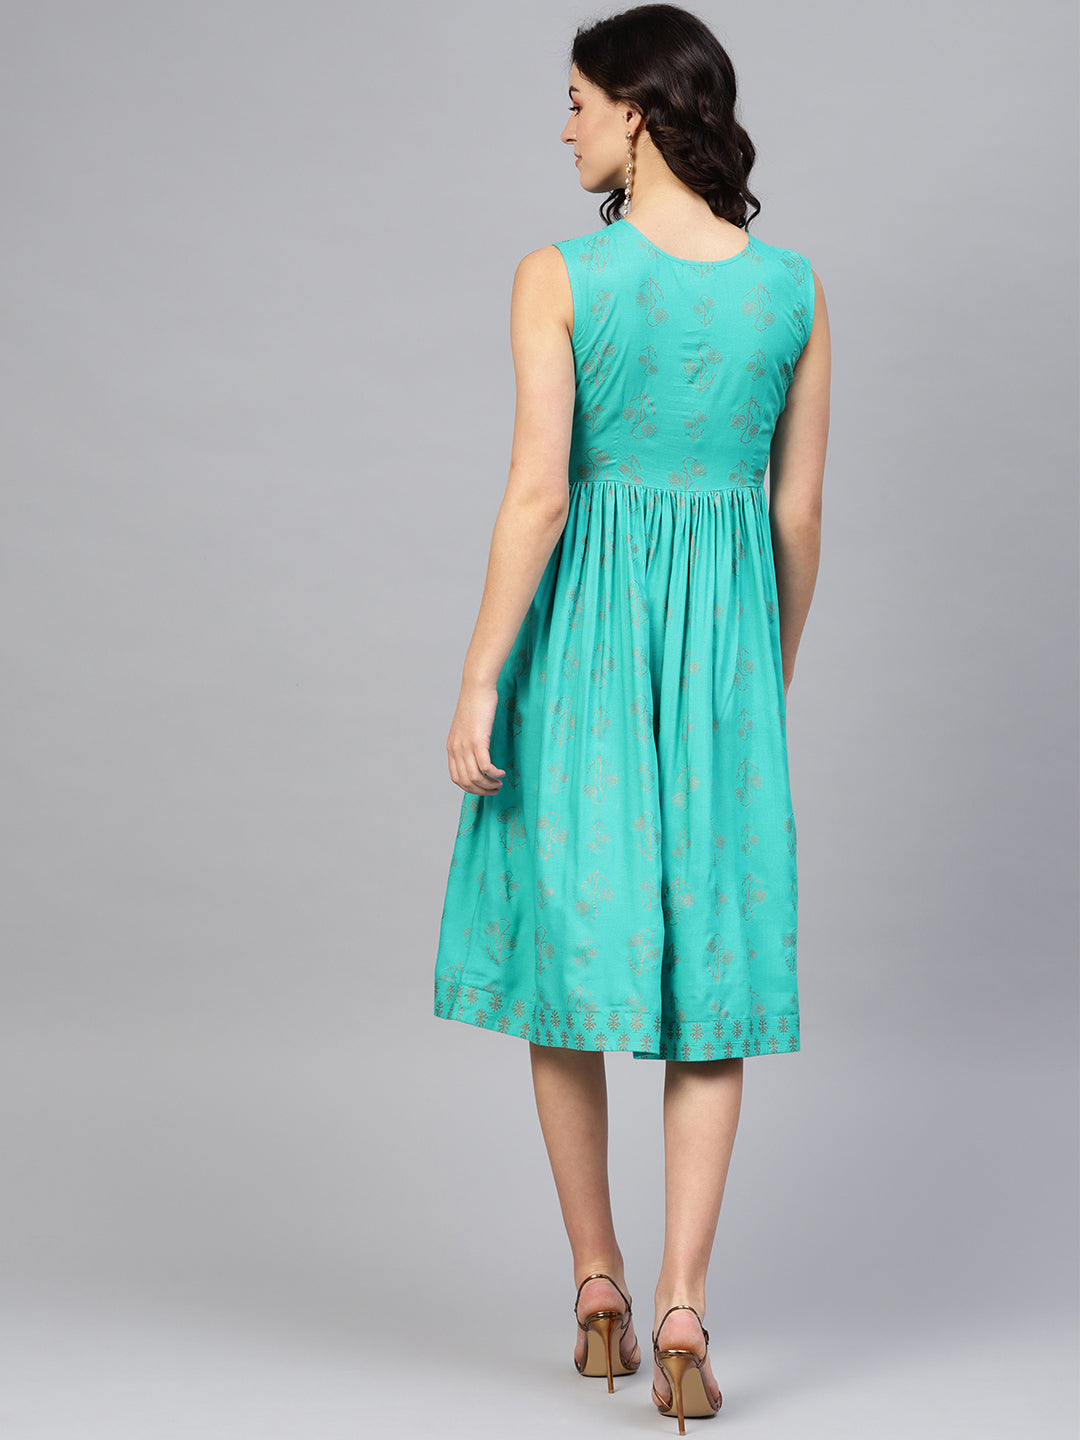 Printed Midi Dress with asymmetric overlap neck in Mint Blue